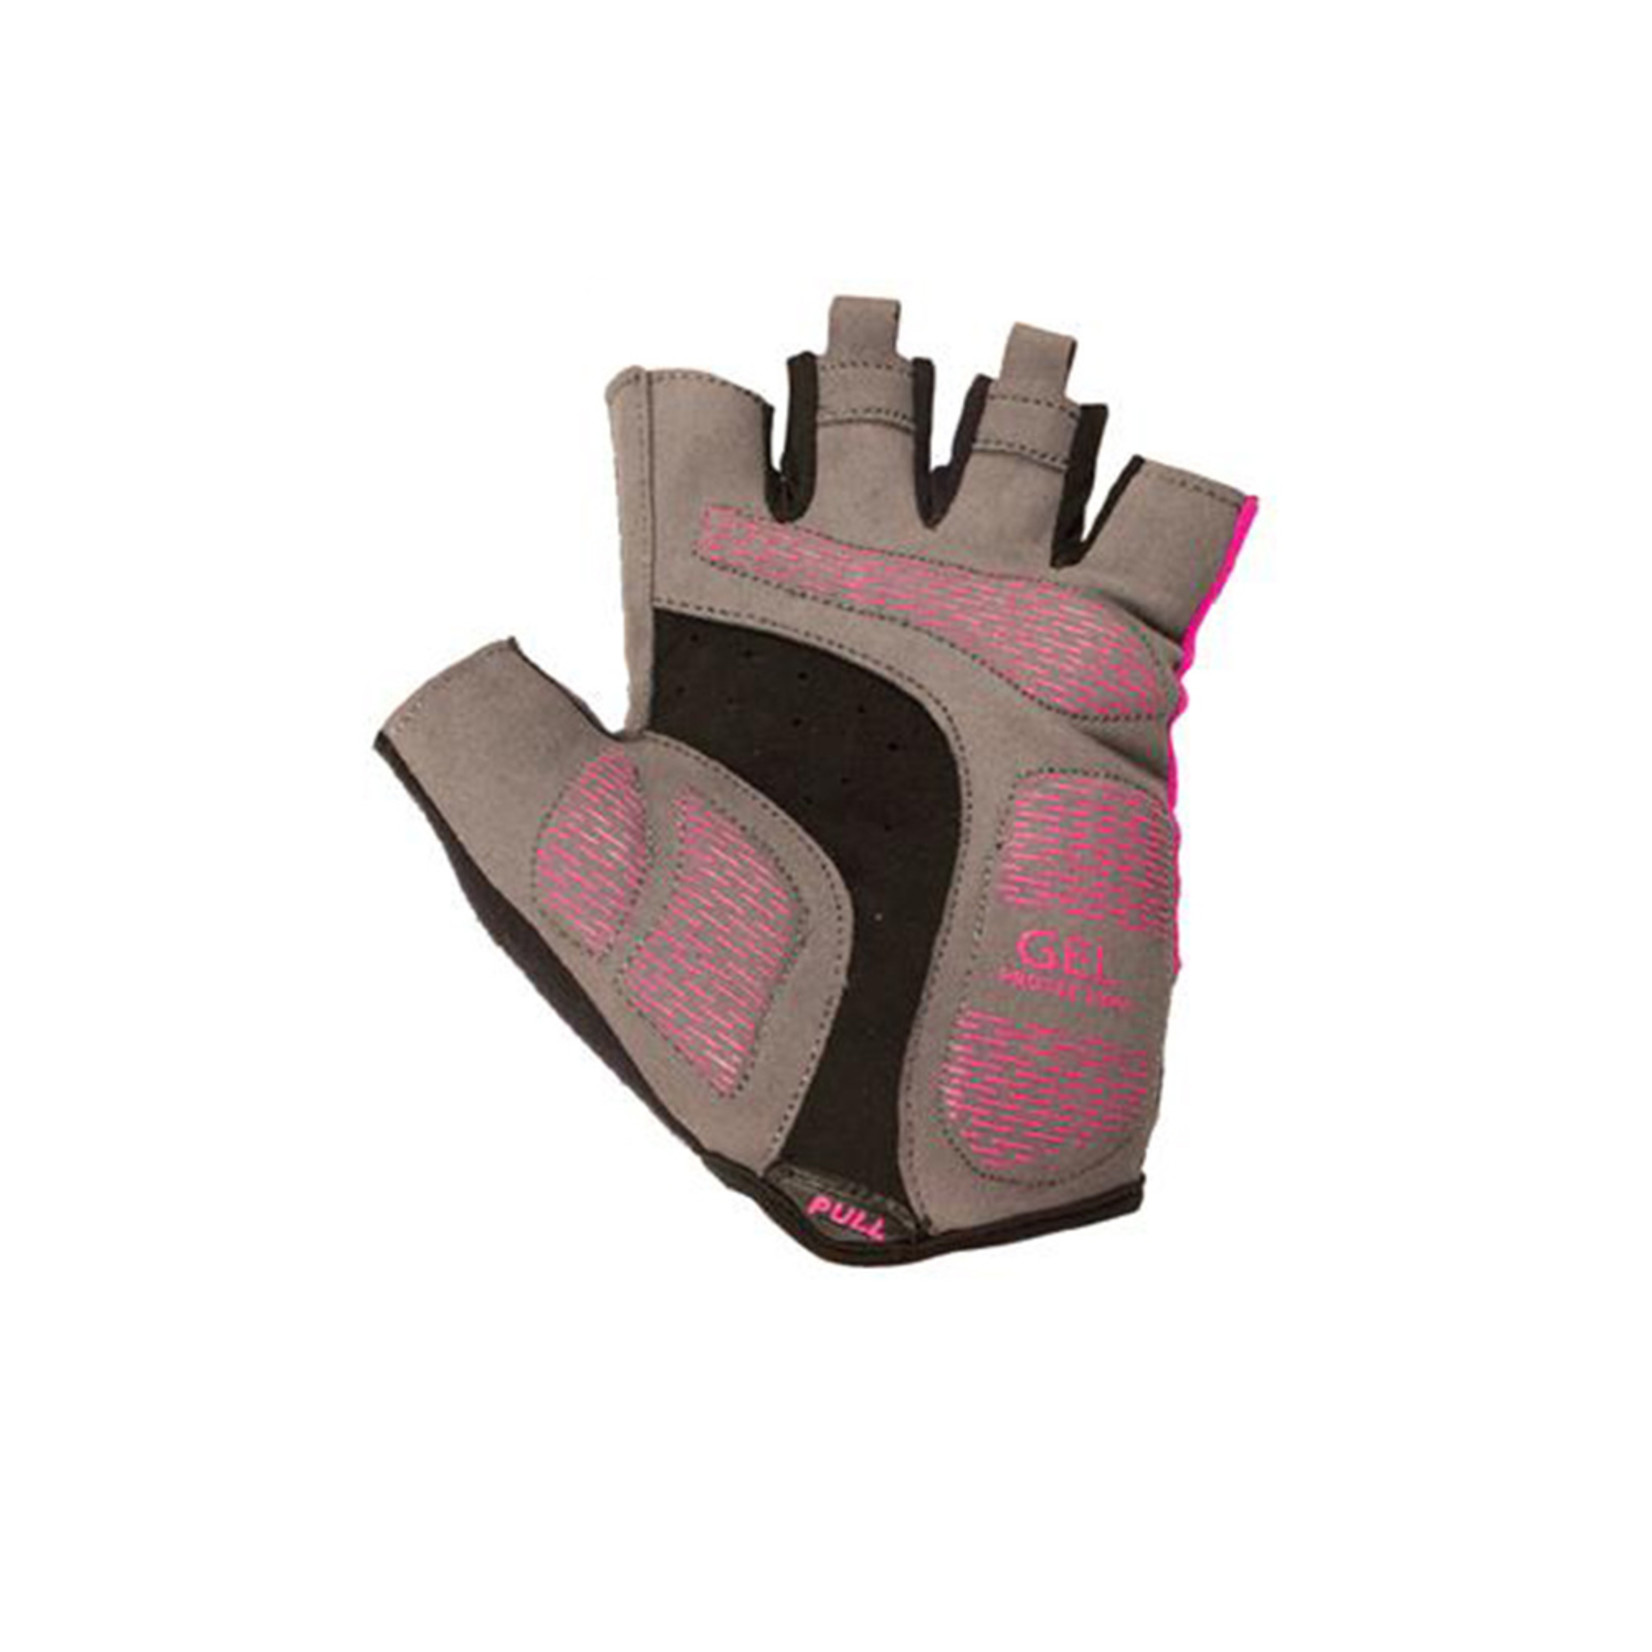 Azur Azur Bike/Cycling Glove - Synthetic Palm - S60 Series - Pink - X-Large